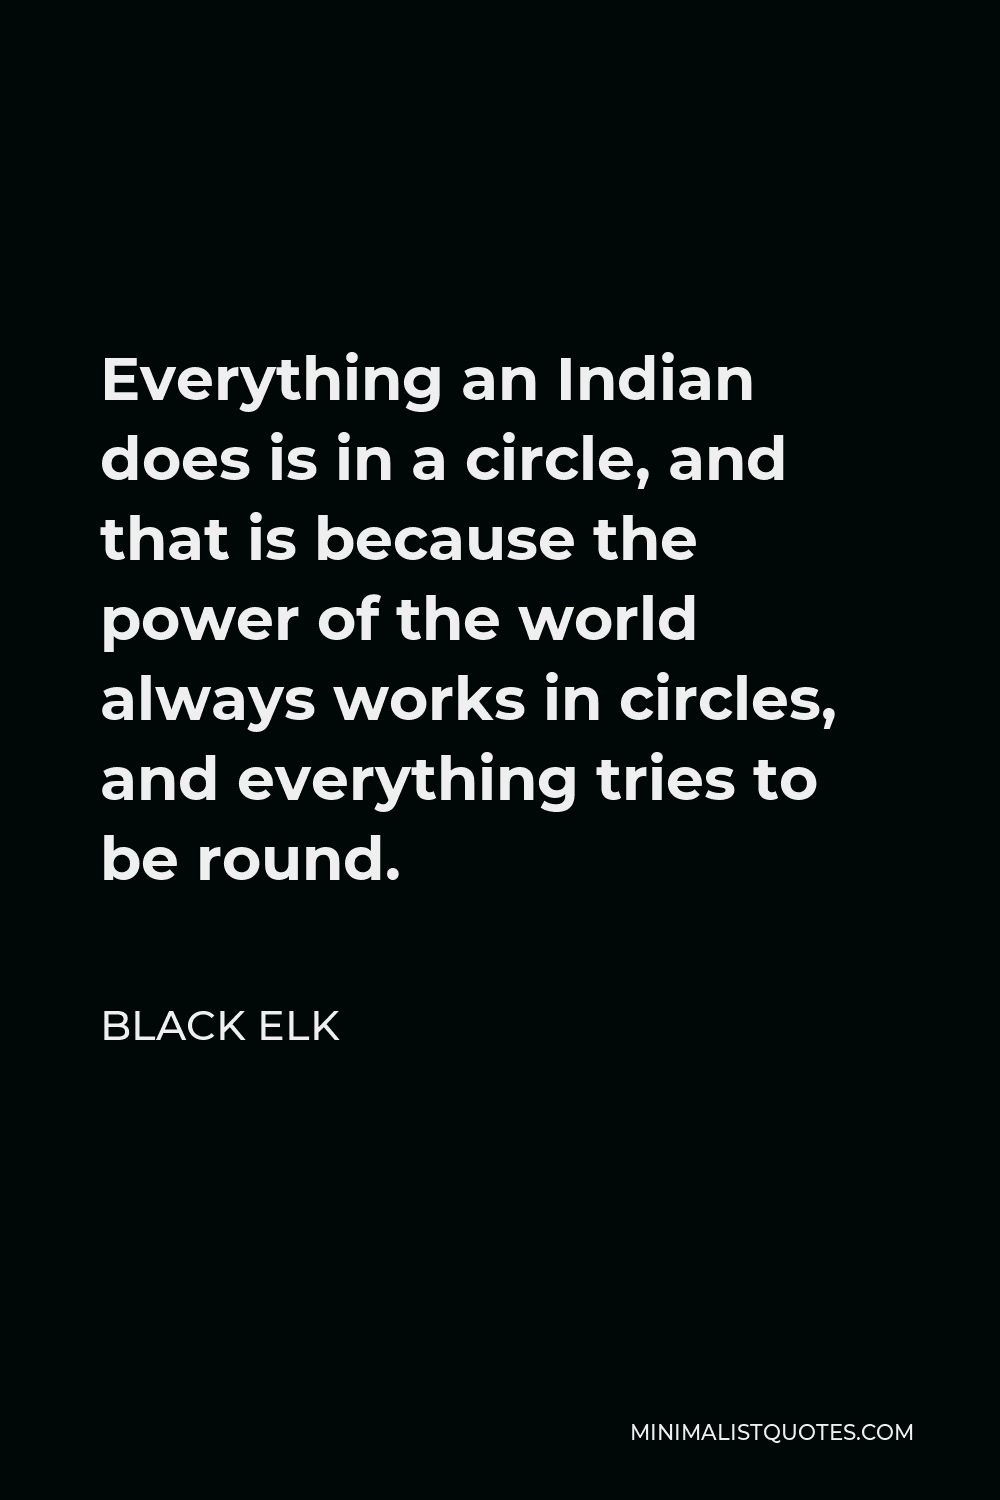 Black Elk Quote - Everything an Indian does is in a circle, and that is because the power of the world always works in circles, and everything tries to be round.